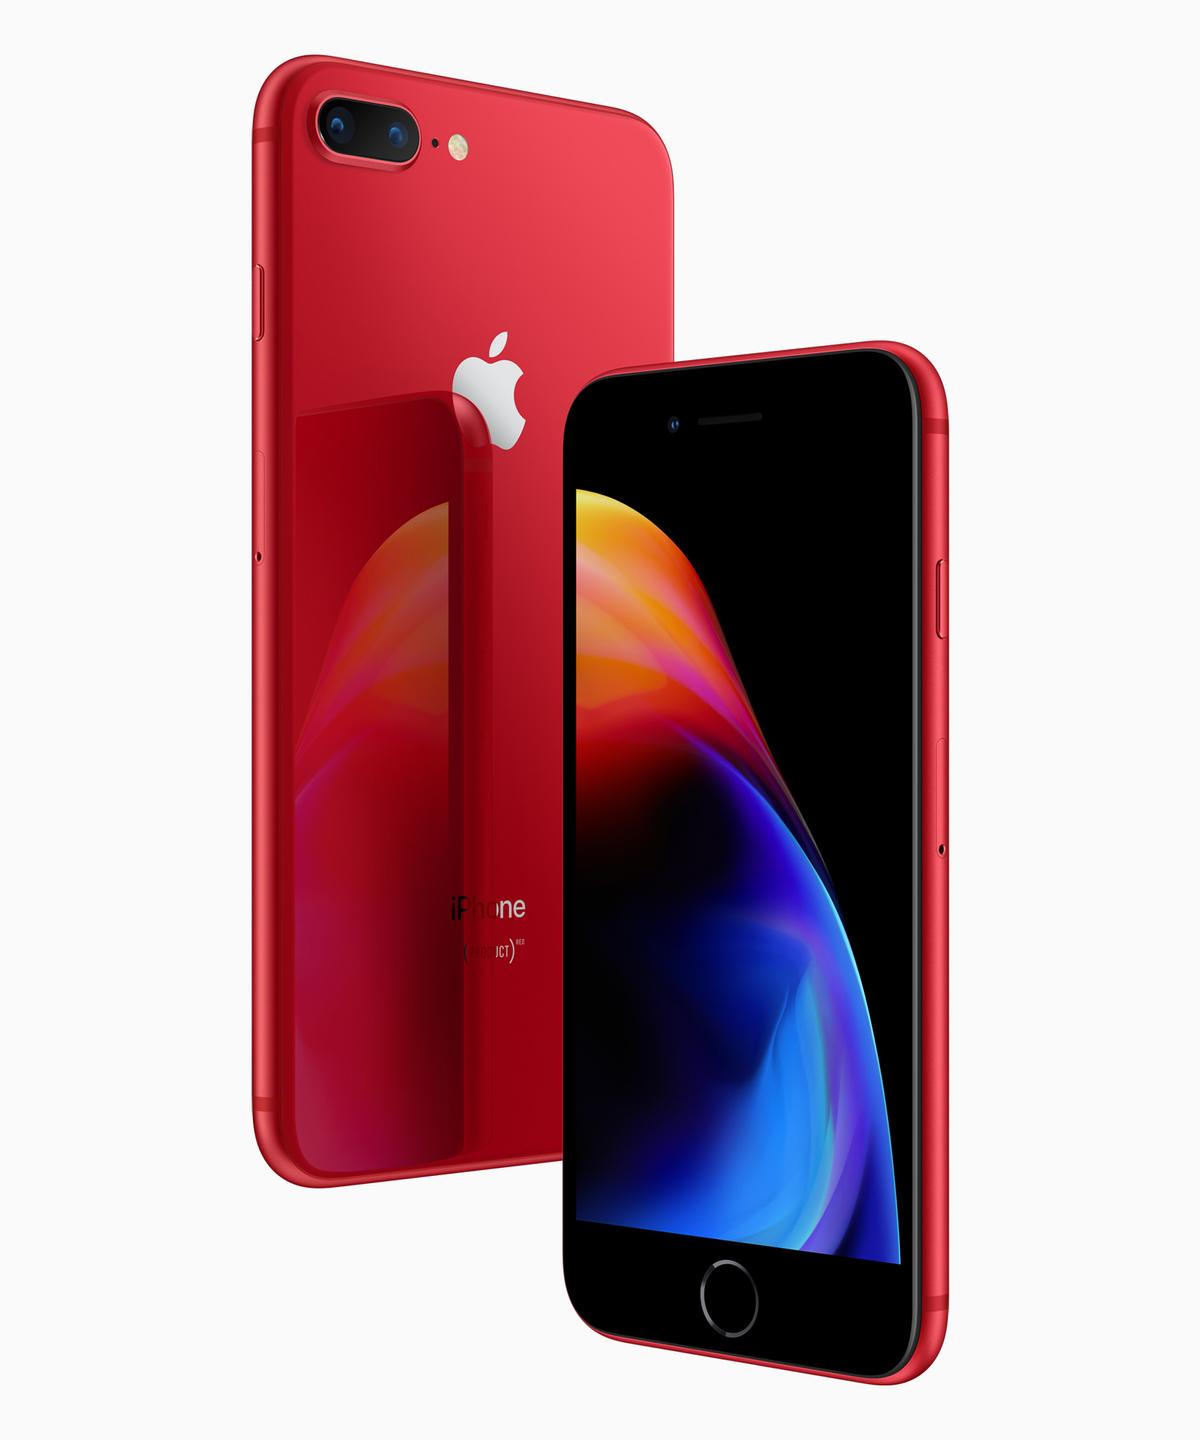 czerwony iphone 8 iphone 8 plus product red 1 class="wp-image-713082" 